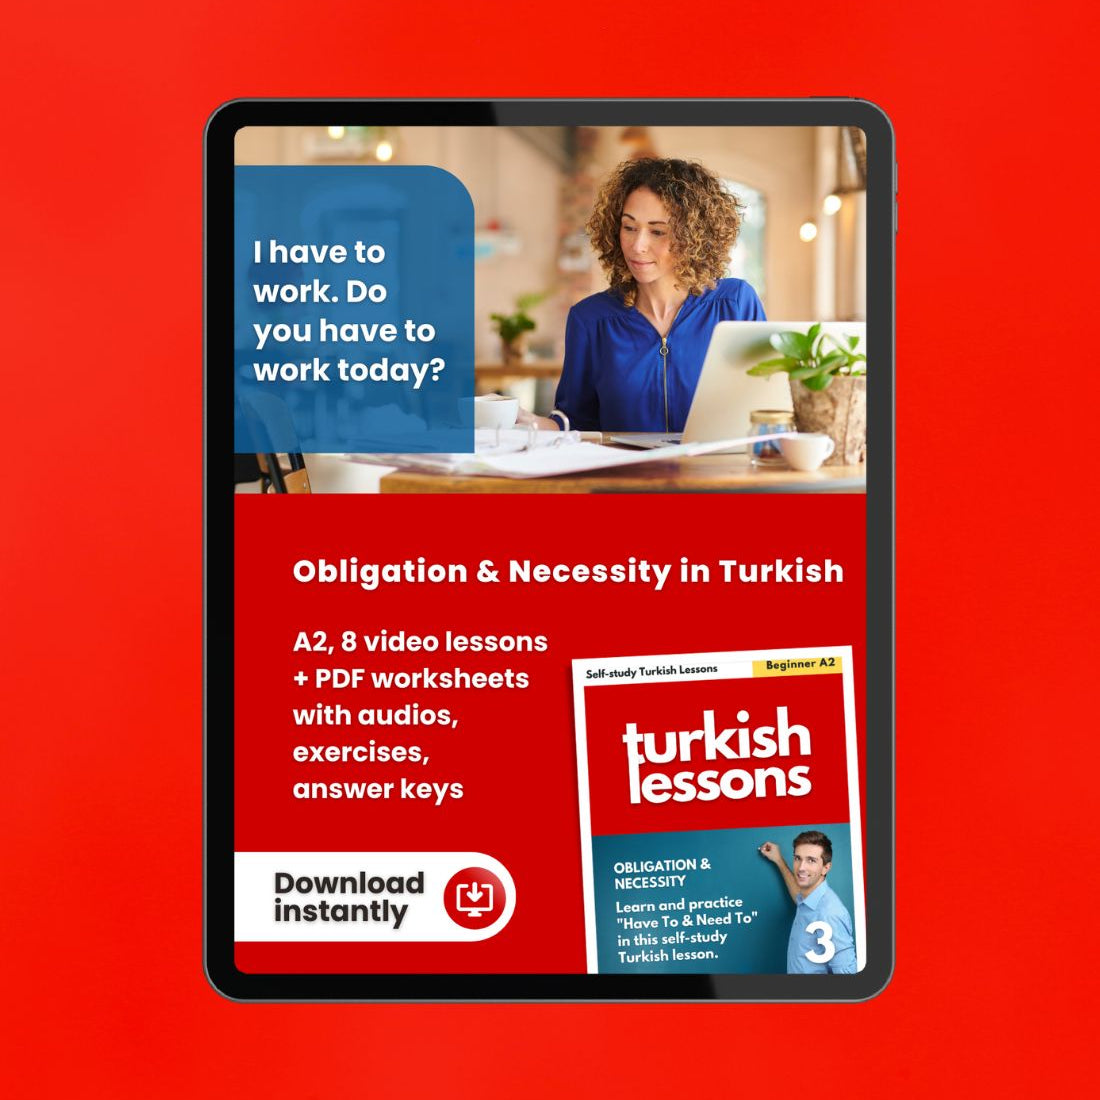 turkish lessons a2 - obligation in turkish language